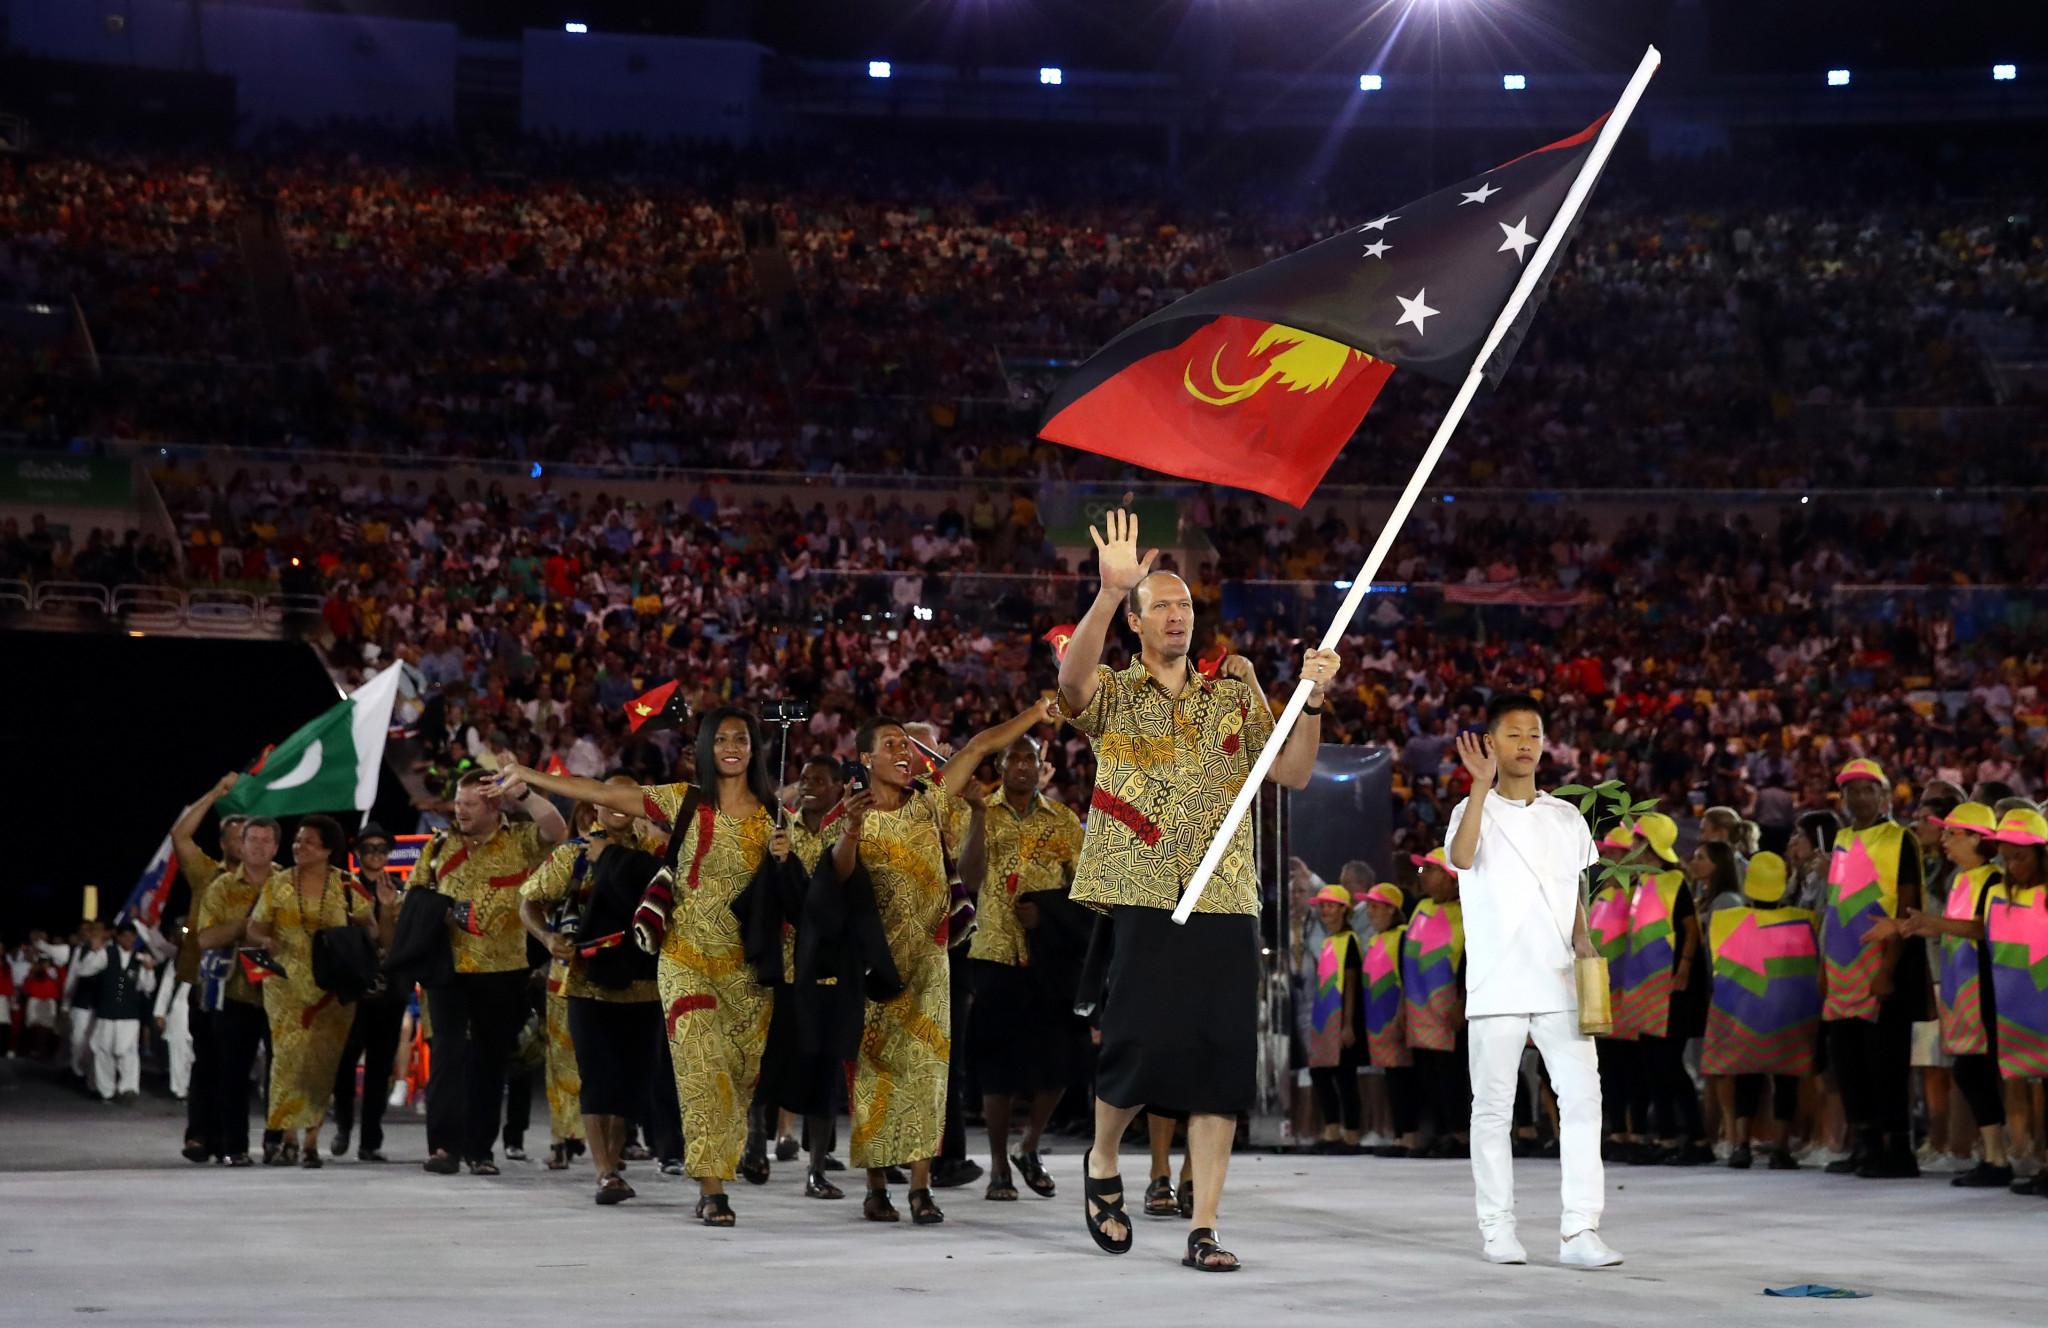 The deal will help Papua New Guinea's athletes stay connected in Gold Coast ©Getty Images